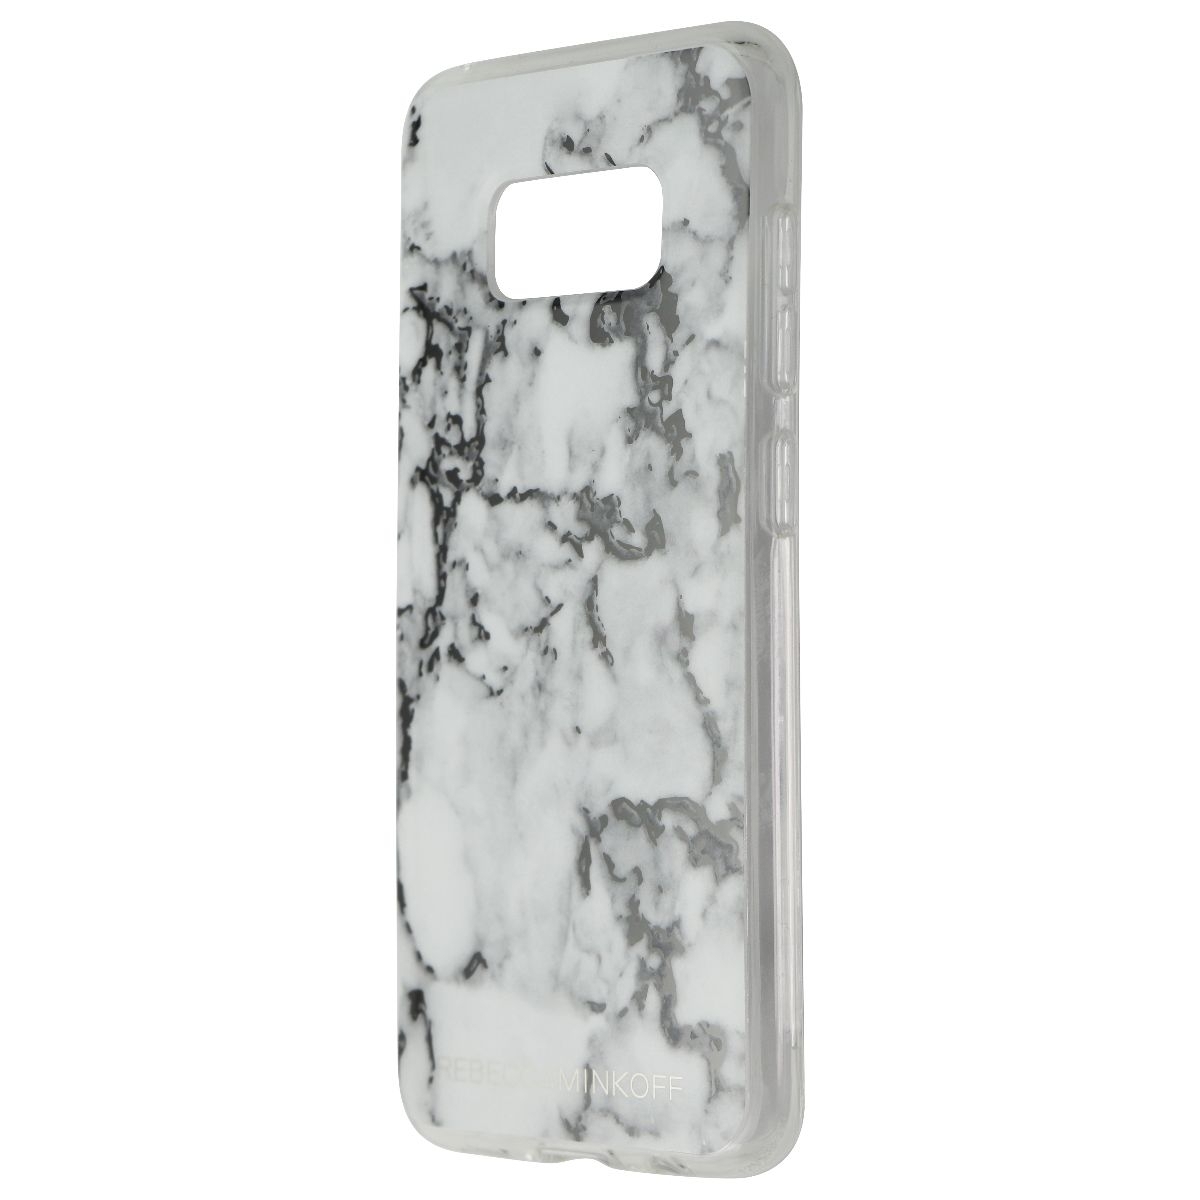 Rebecca Minkoff Sheer Protection Case For Samsung Galaxy S8 - Marble / Clear (Refurbished)